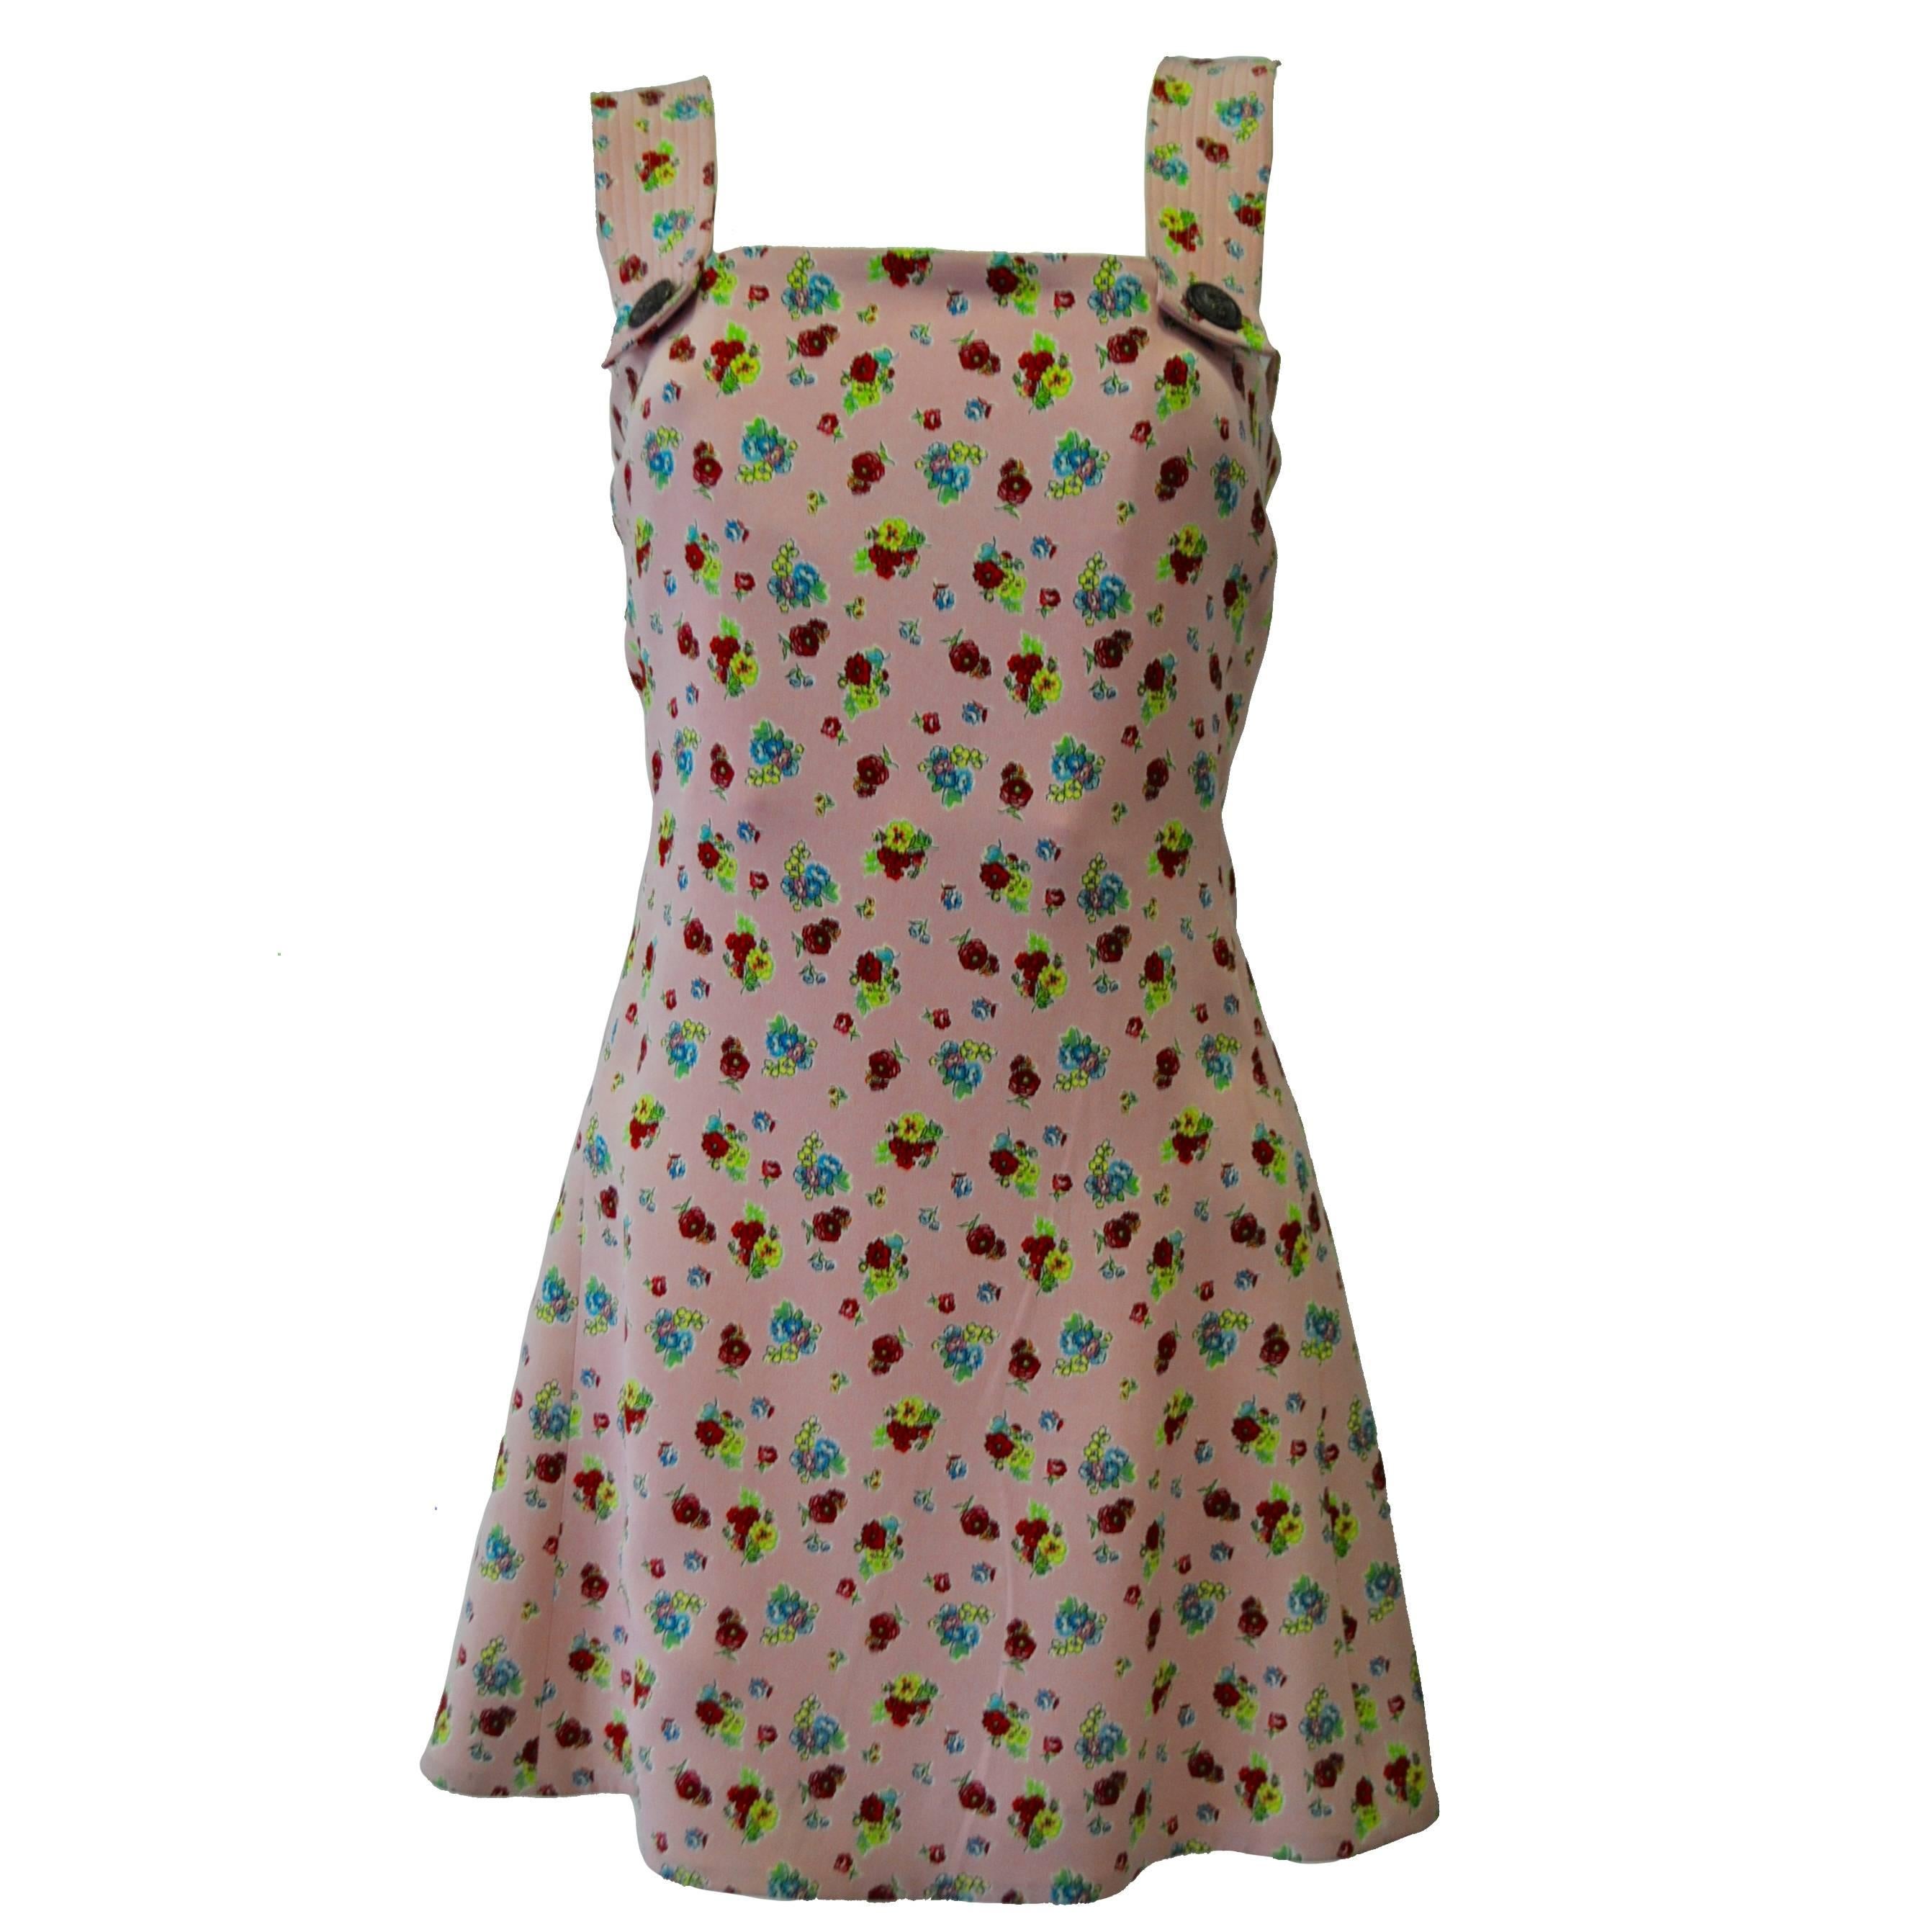 Istante Gianni Versace Foral Silk Pinafore Featuring Iconic Buttons For Sale